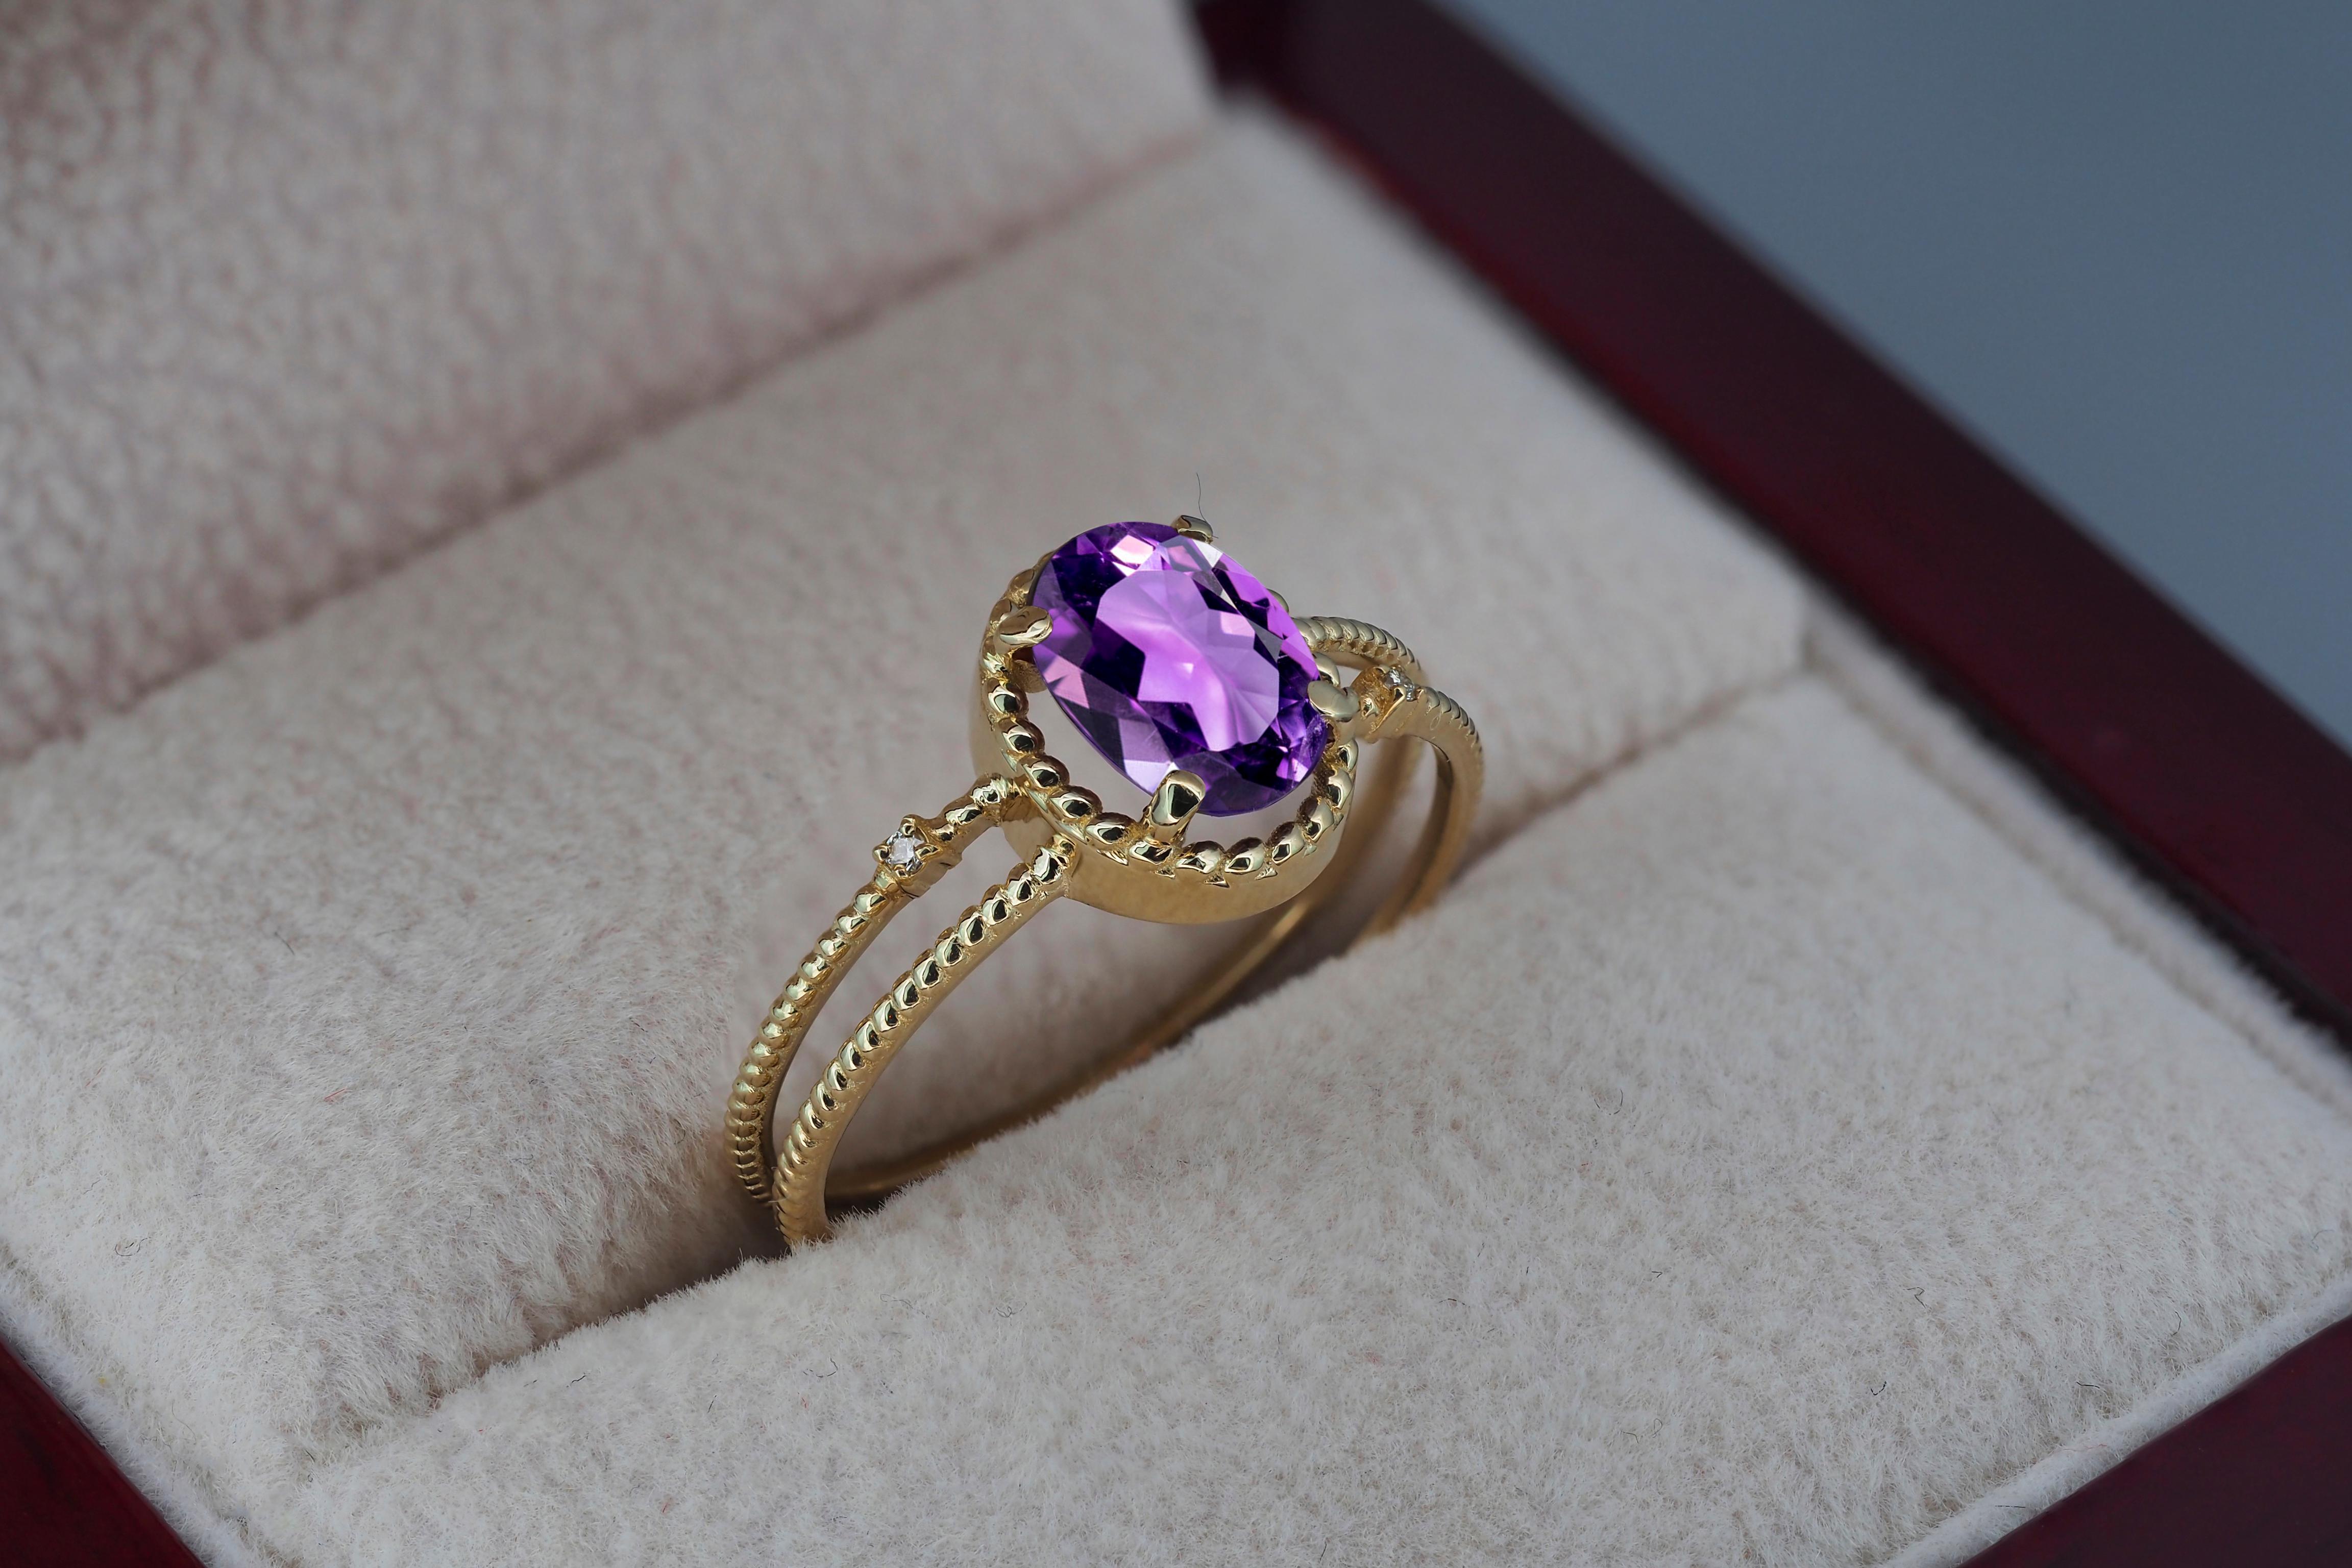 Women's Amethyst Gold Ring, Oval Amethyst Ring, 14k Gold Ring with Amethyst For Sale